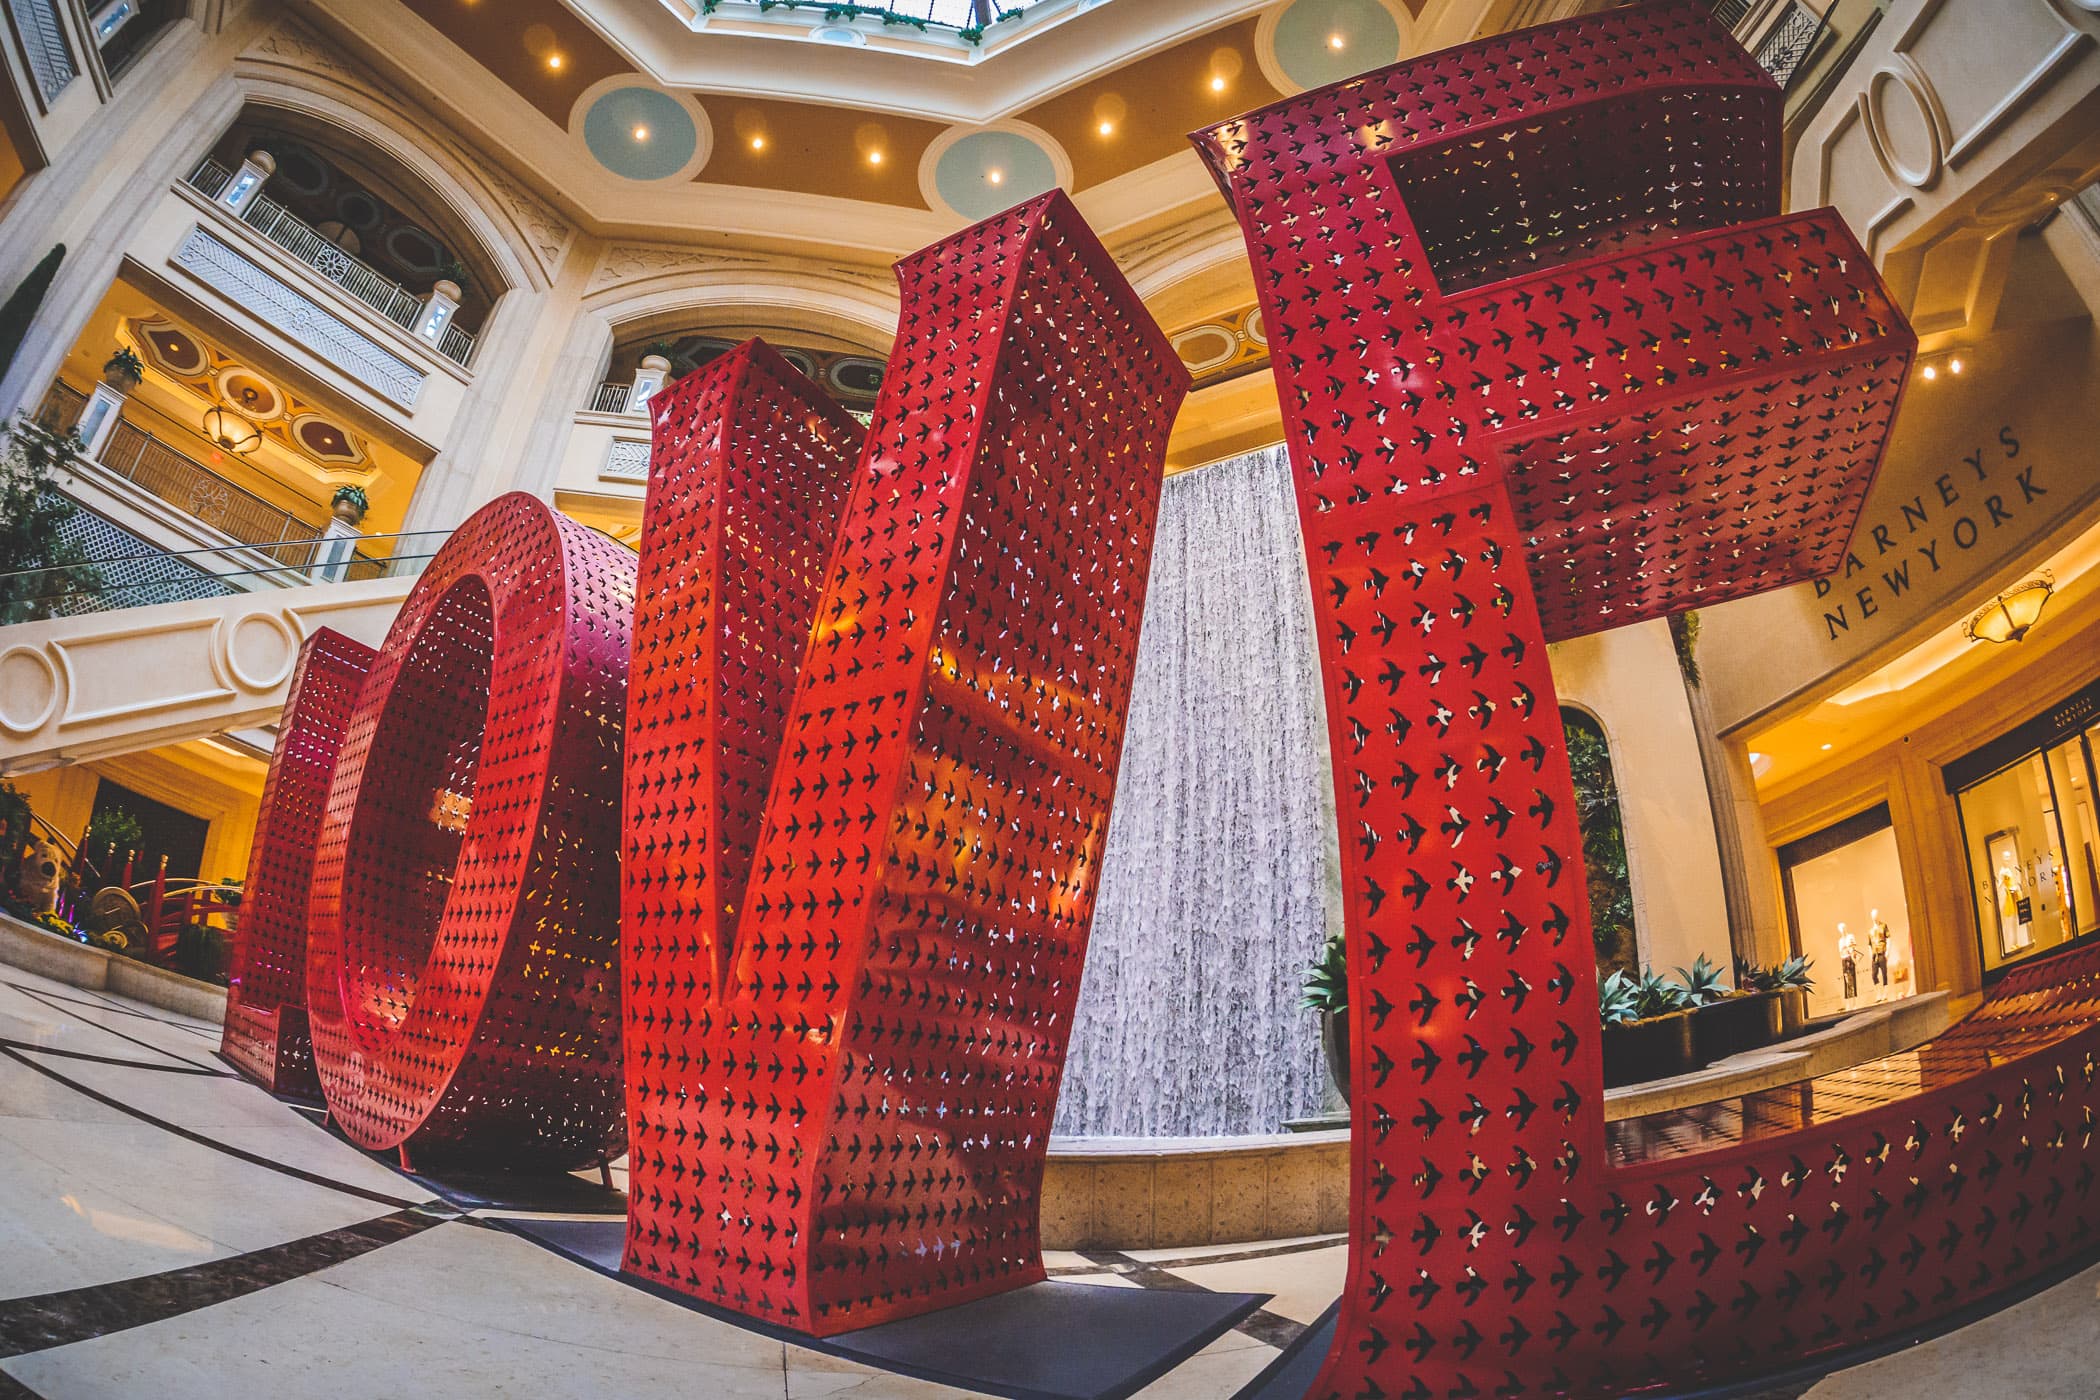 Giant letters spell "Love" in the atrium at the Grand Canal Shoppes, The Venetian, Las Vegas.